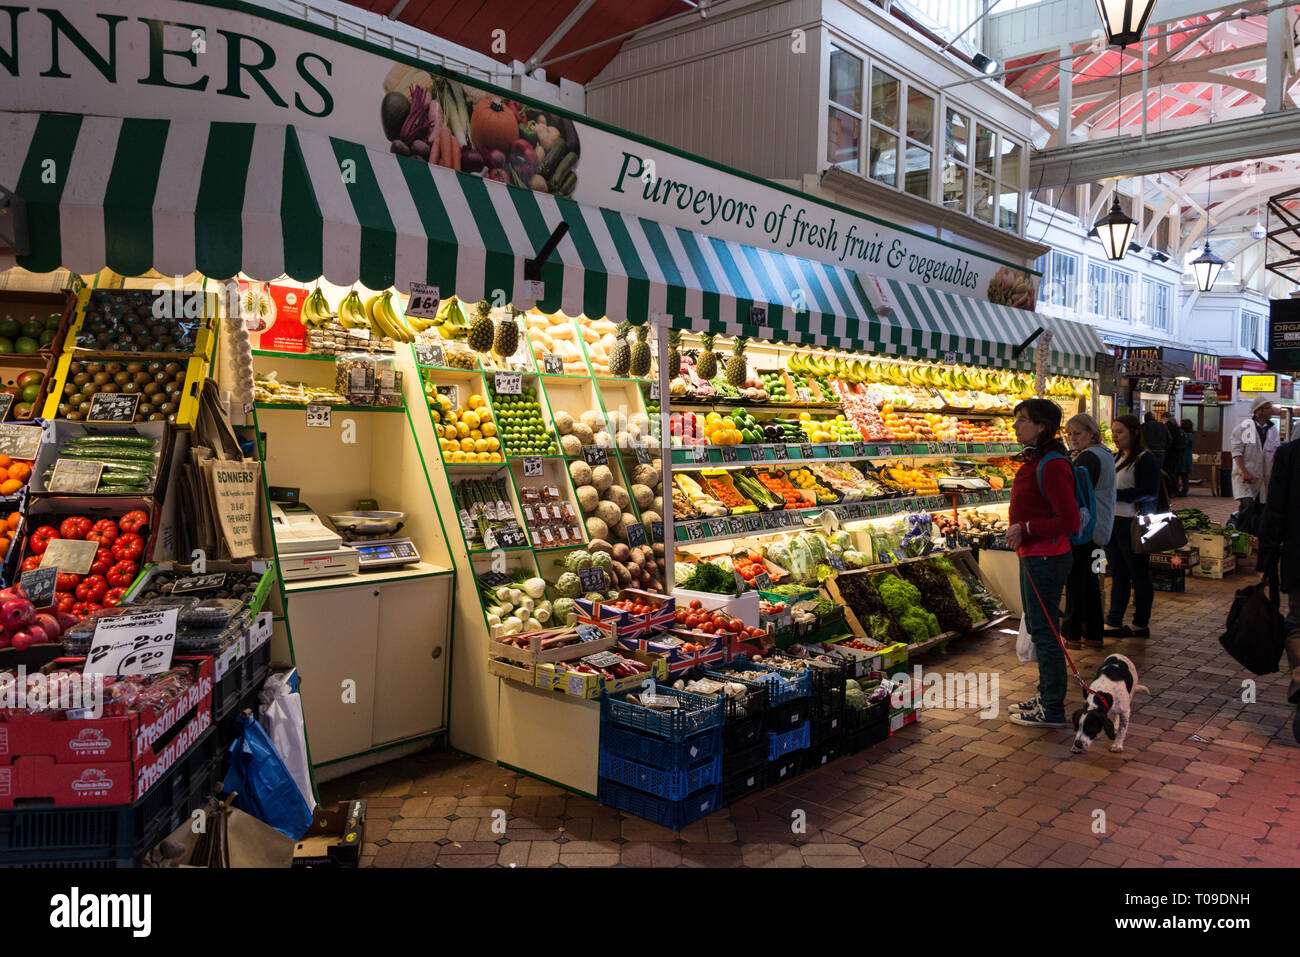 A fresh fruit & Vegetable stall at the undercover Golden Cross in Oxford, Oxfordshire,Britain Stock Photo